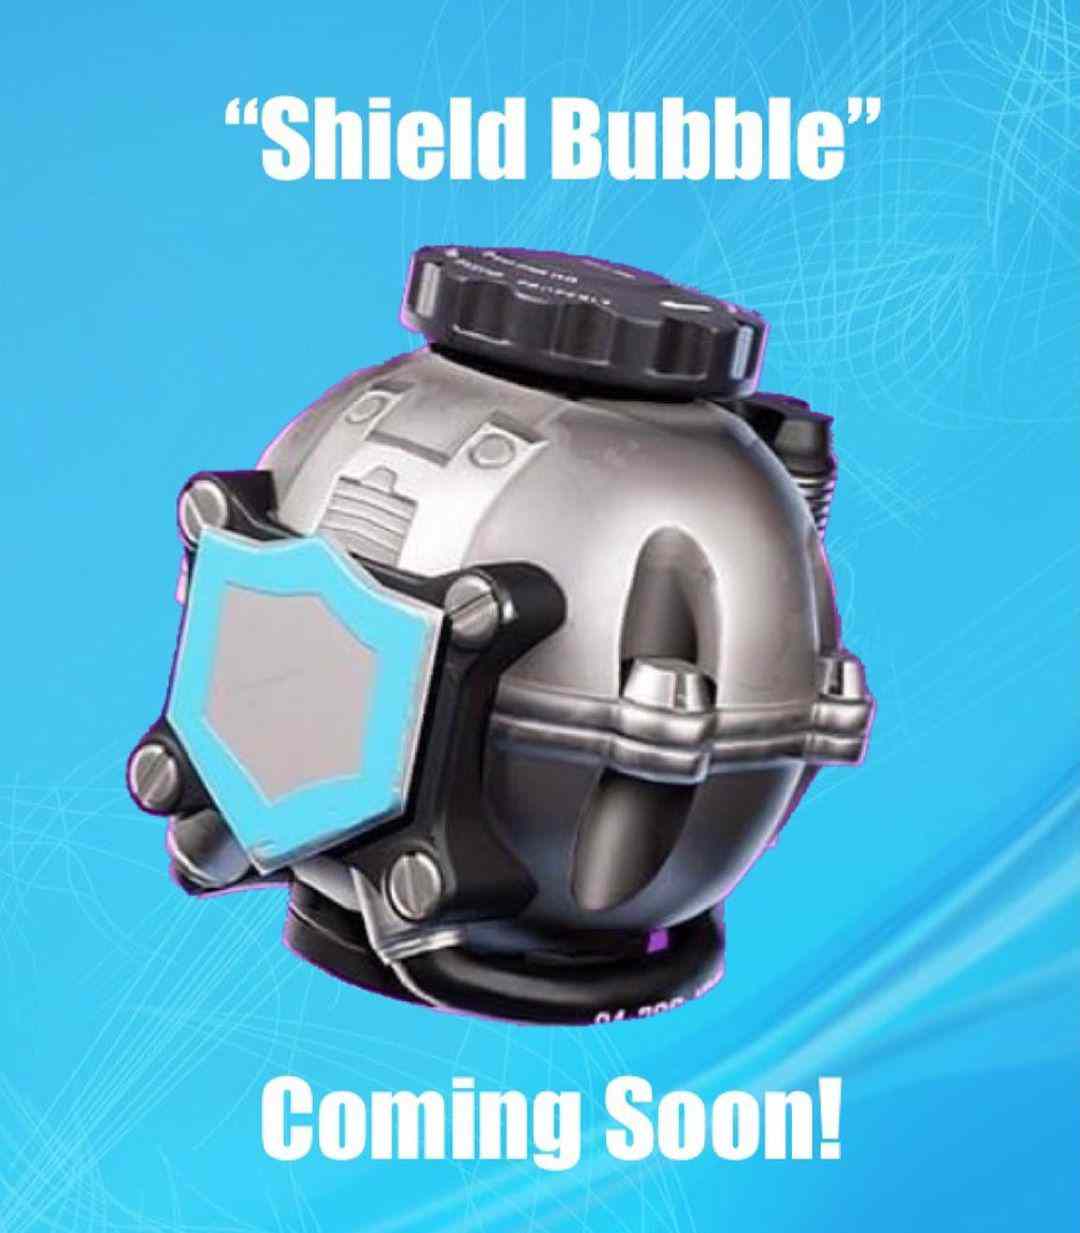 [Fortnite X Mayhem] Fortnite new item Shield Bubble coming in v10.20 update (patch notes and more)